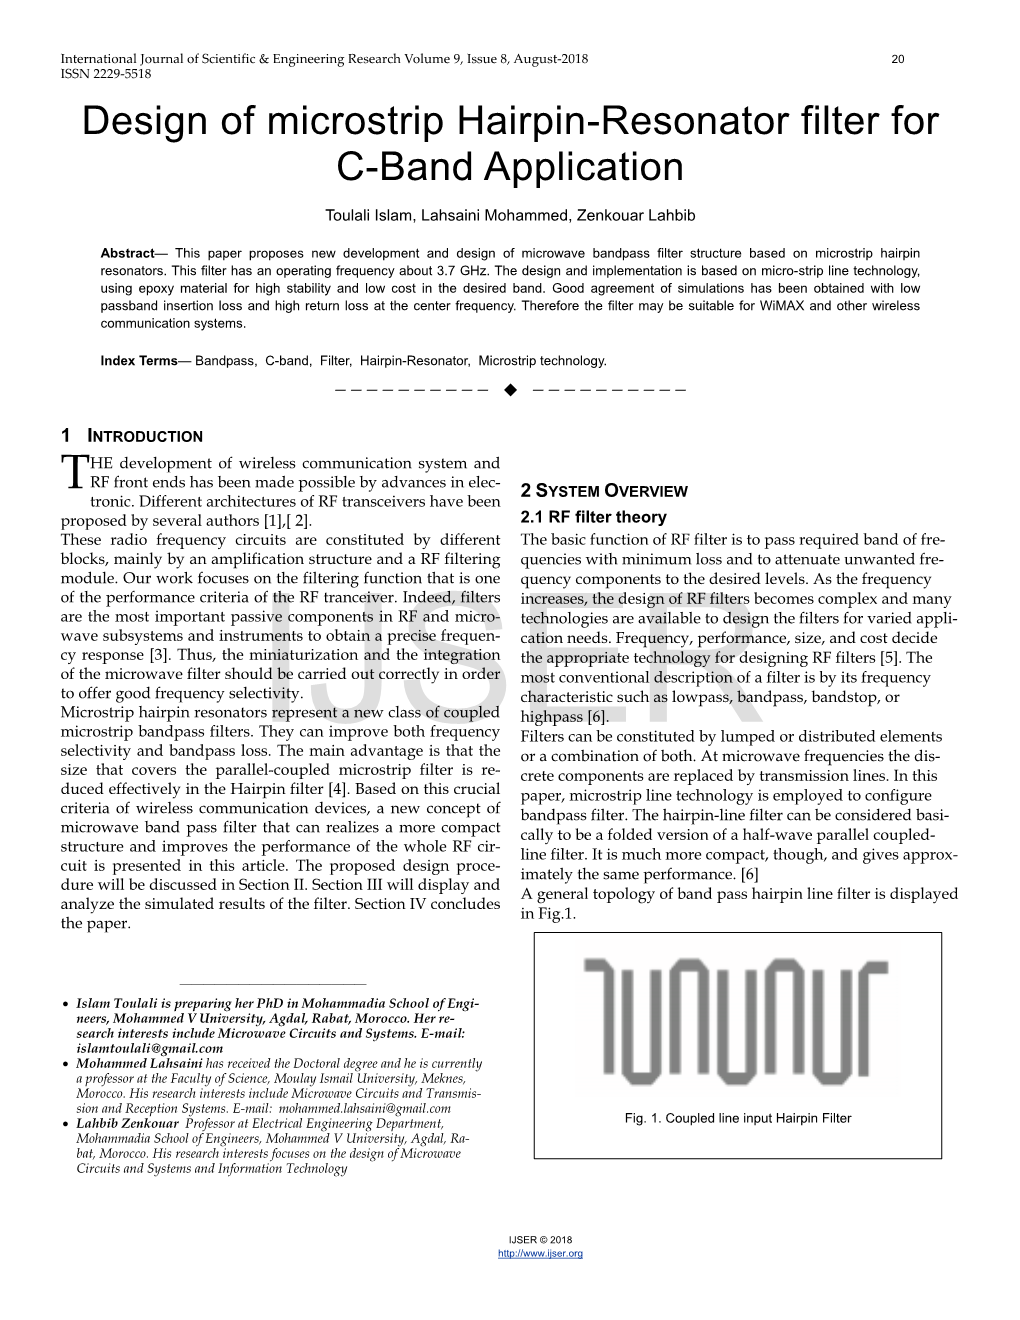 Design of Microstrip Hairpin-Resonator Filter for C-Band Application